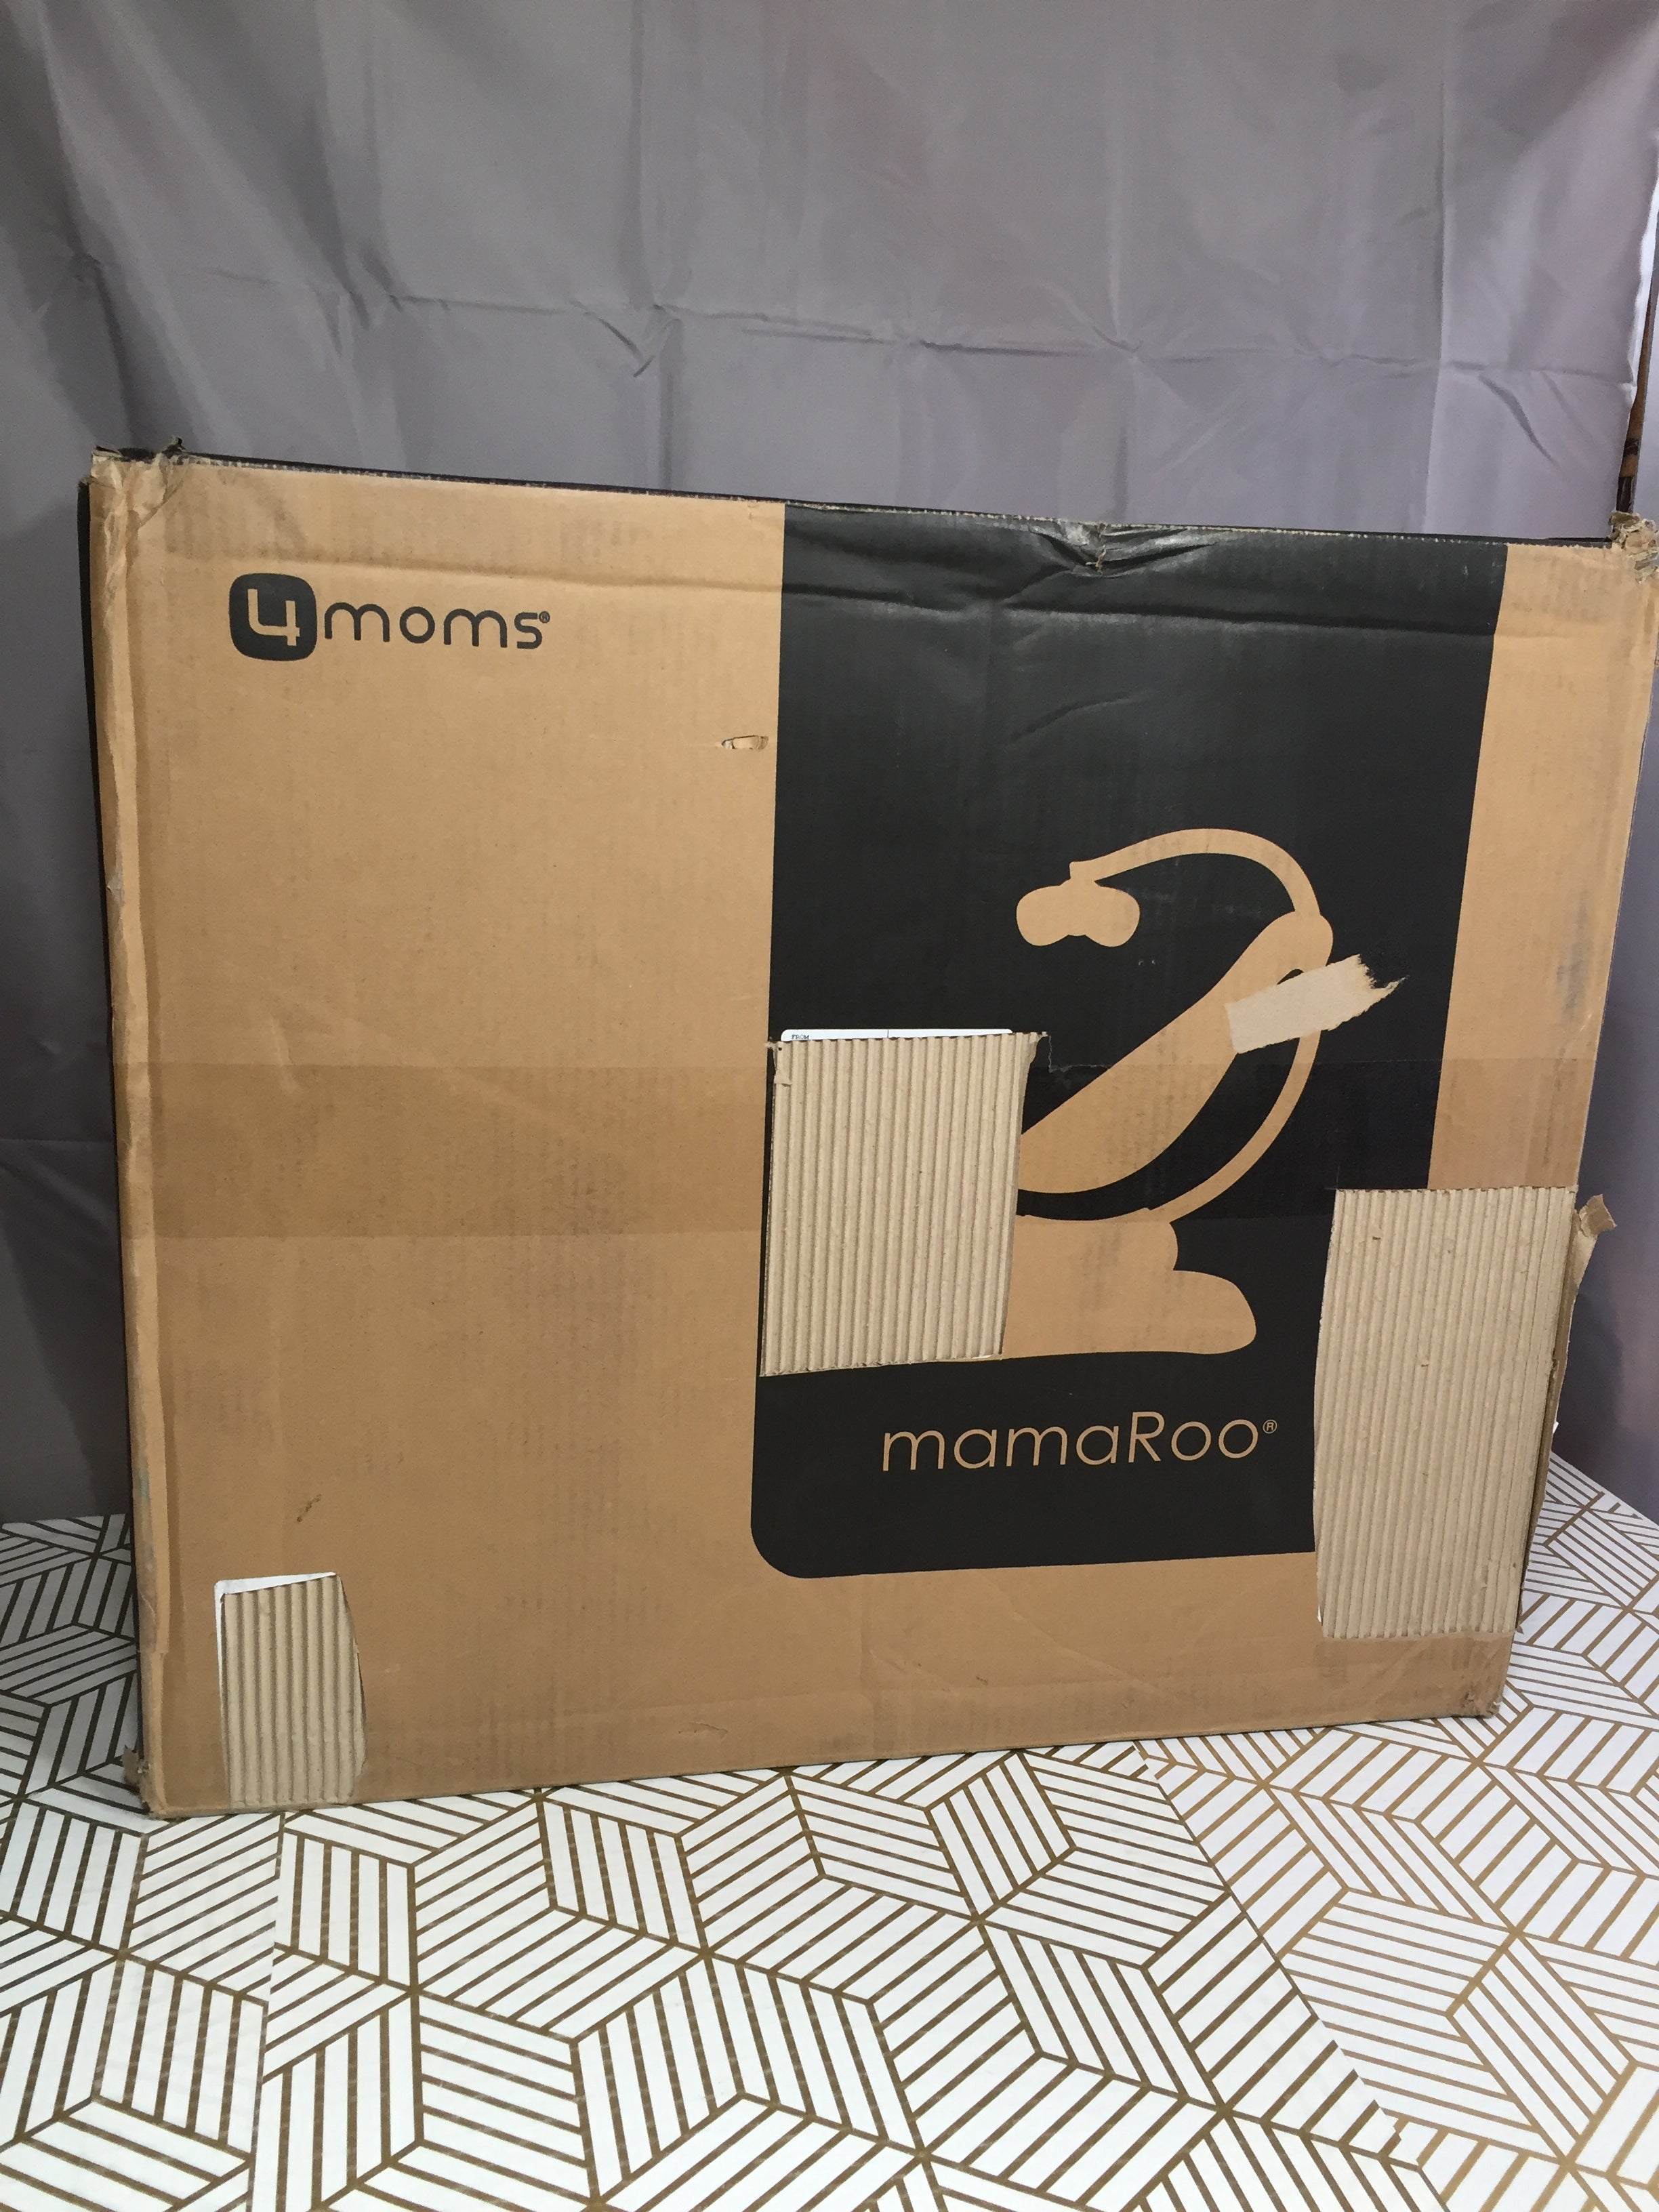 4moms MamaRoo Multi-Motion Baby Swing, Bluetooth with 5 Unique Motions, Grey (8056083218670)